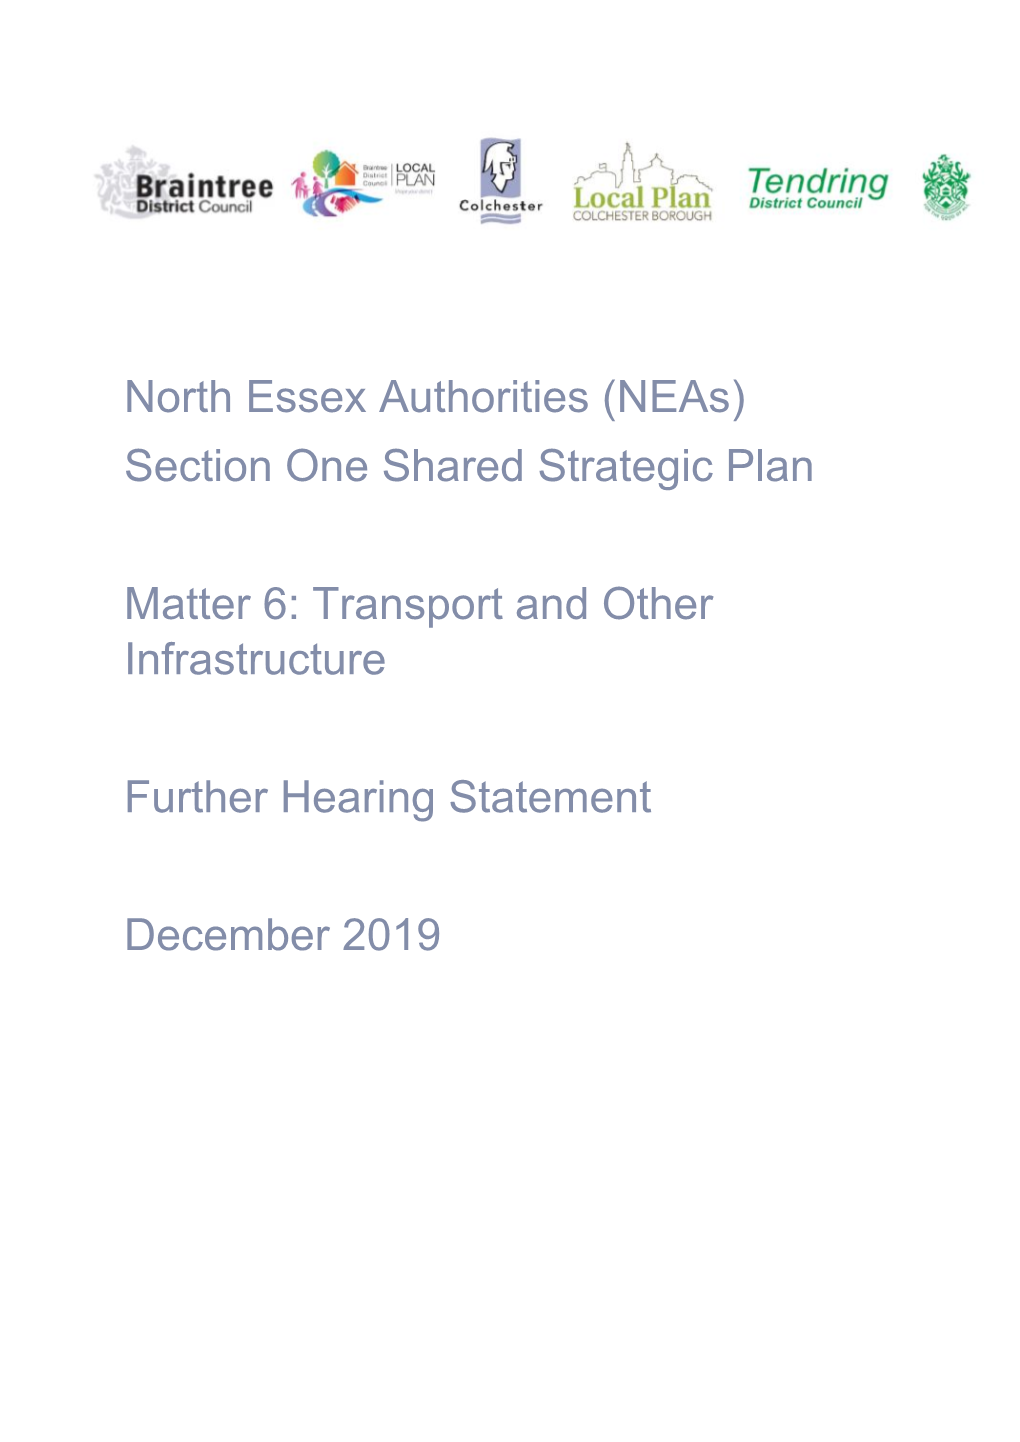 North Essex Authorities (Neas) Section One Shared Strategic Plan